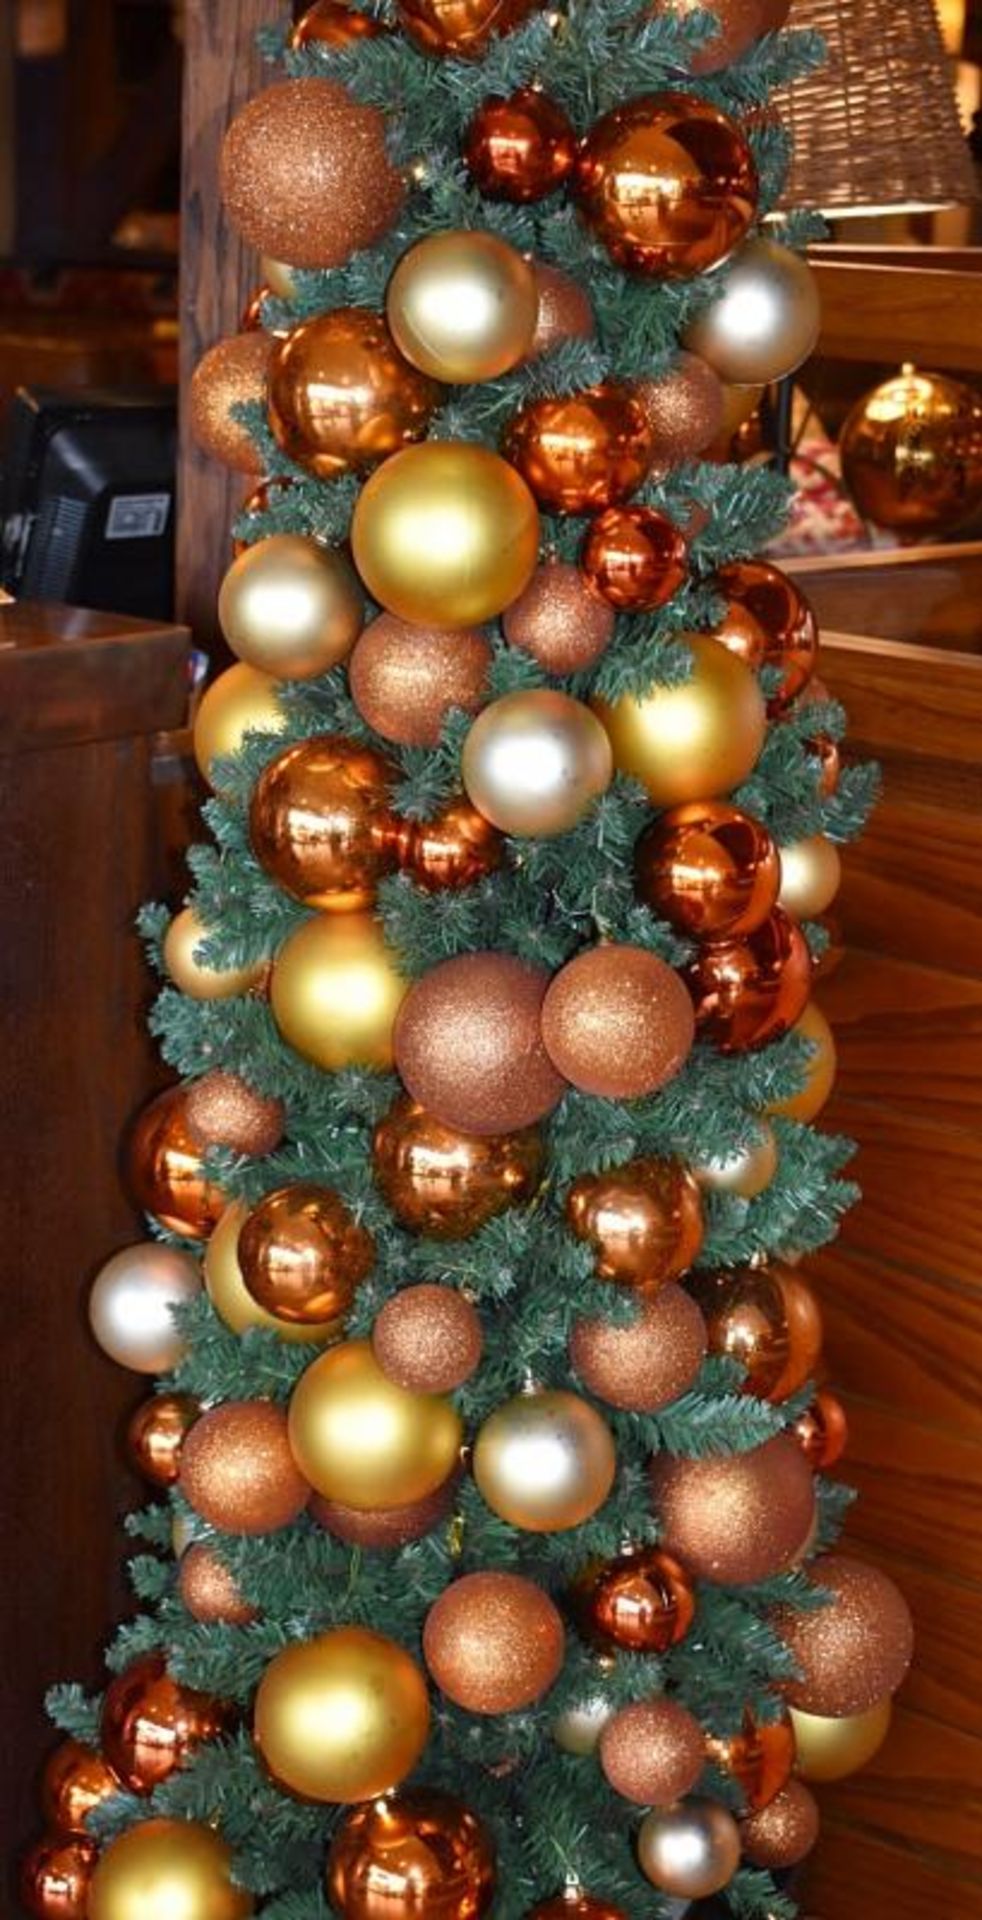 1 x Christmas Tree - Approx 6ft Tall With Decorations - CL461 - Location: London W3Please note - Image 3 of 4